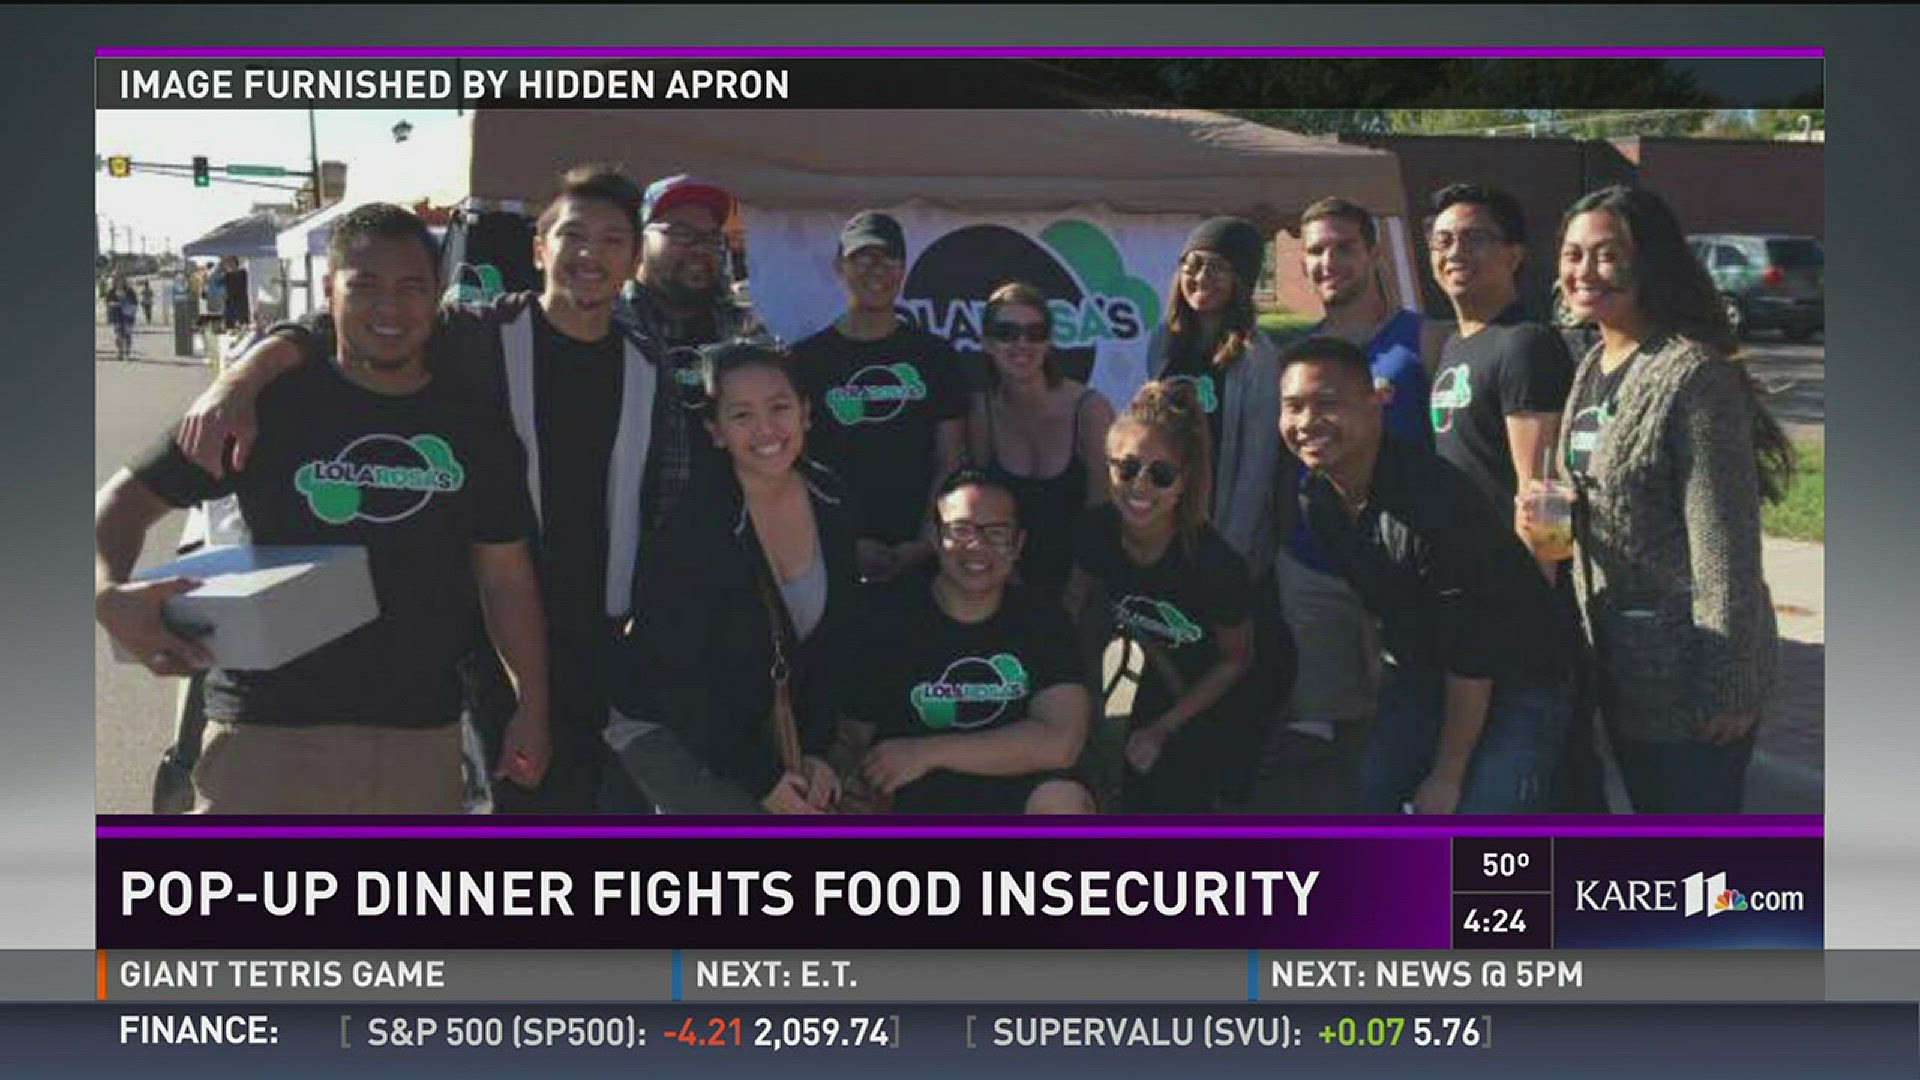 Pop-up dinner fights food insecurity